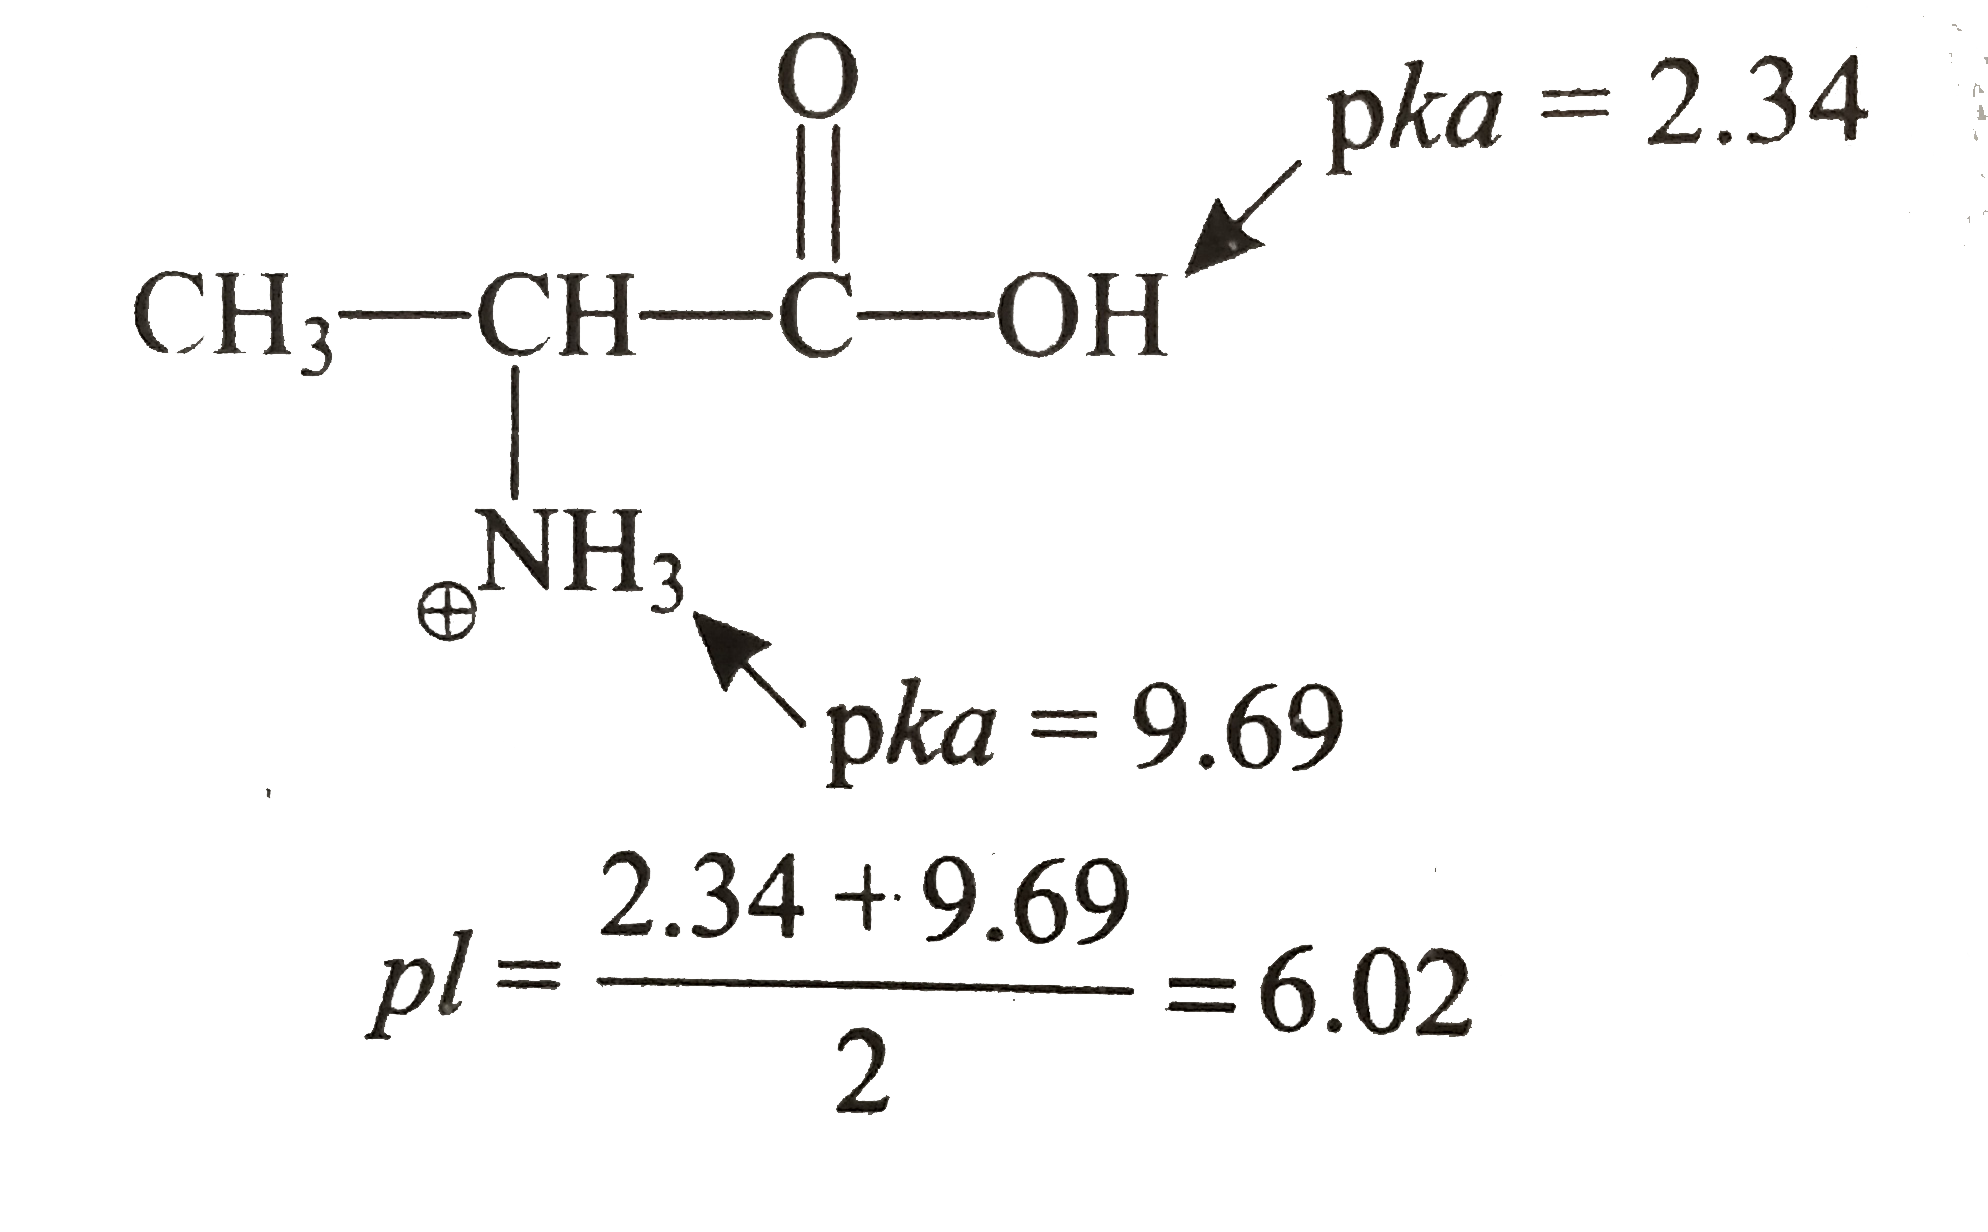 The isoelectric point(pl) of an amino acid is the pH of wihc it has no net charge. The pl of an amino acid that does not have an ionizable side chain such as alanine, is midway between its two pka values.       If an amino acid has ionizable side chain. its pl is the average of the pka values of  the similarly ionizing groups.   What is the pl of the following amino acids?